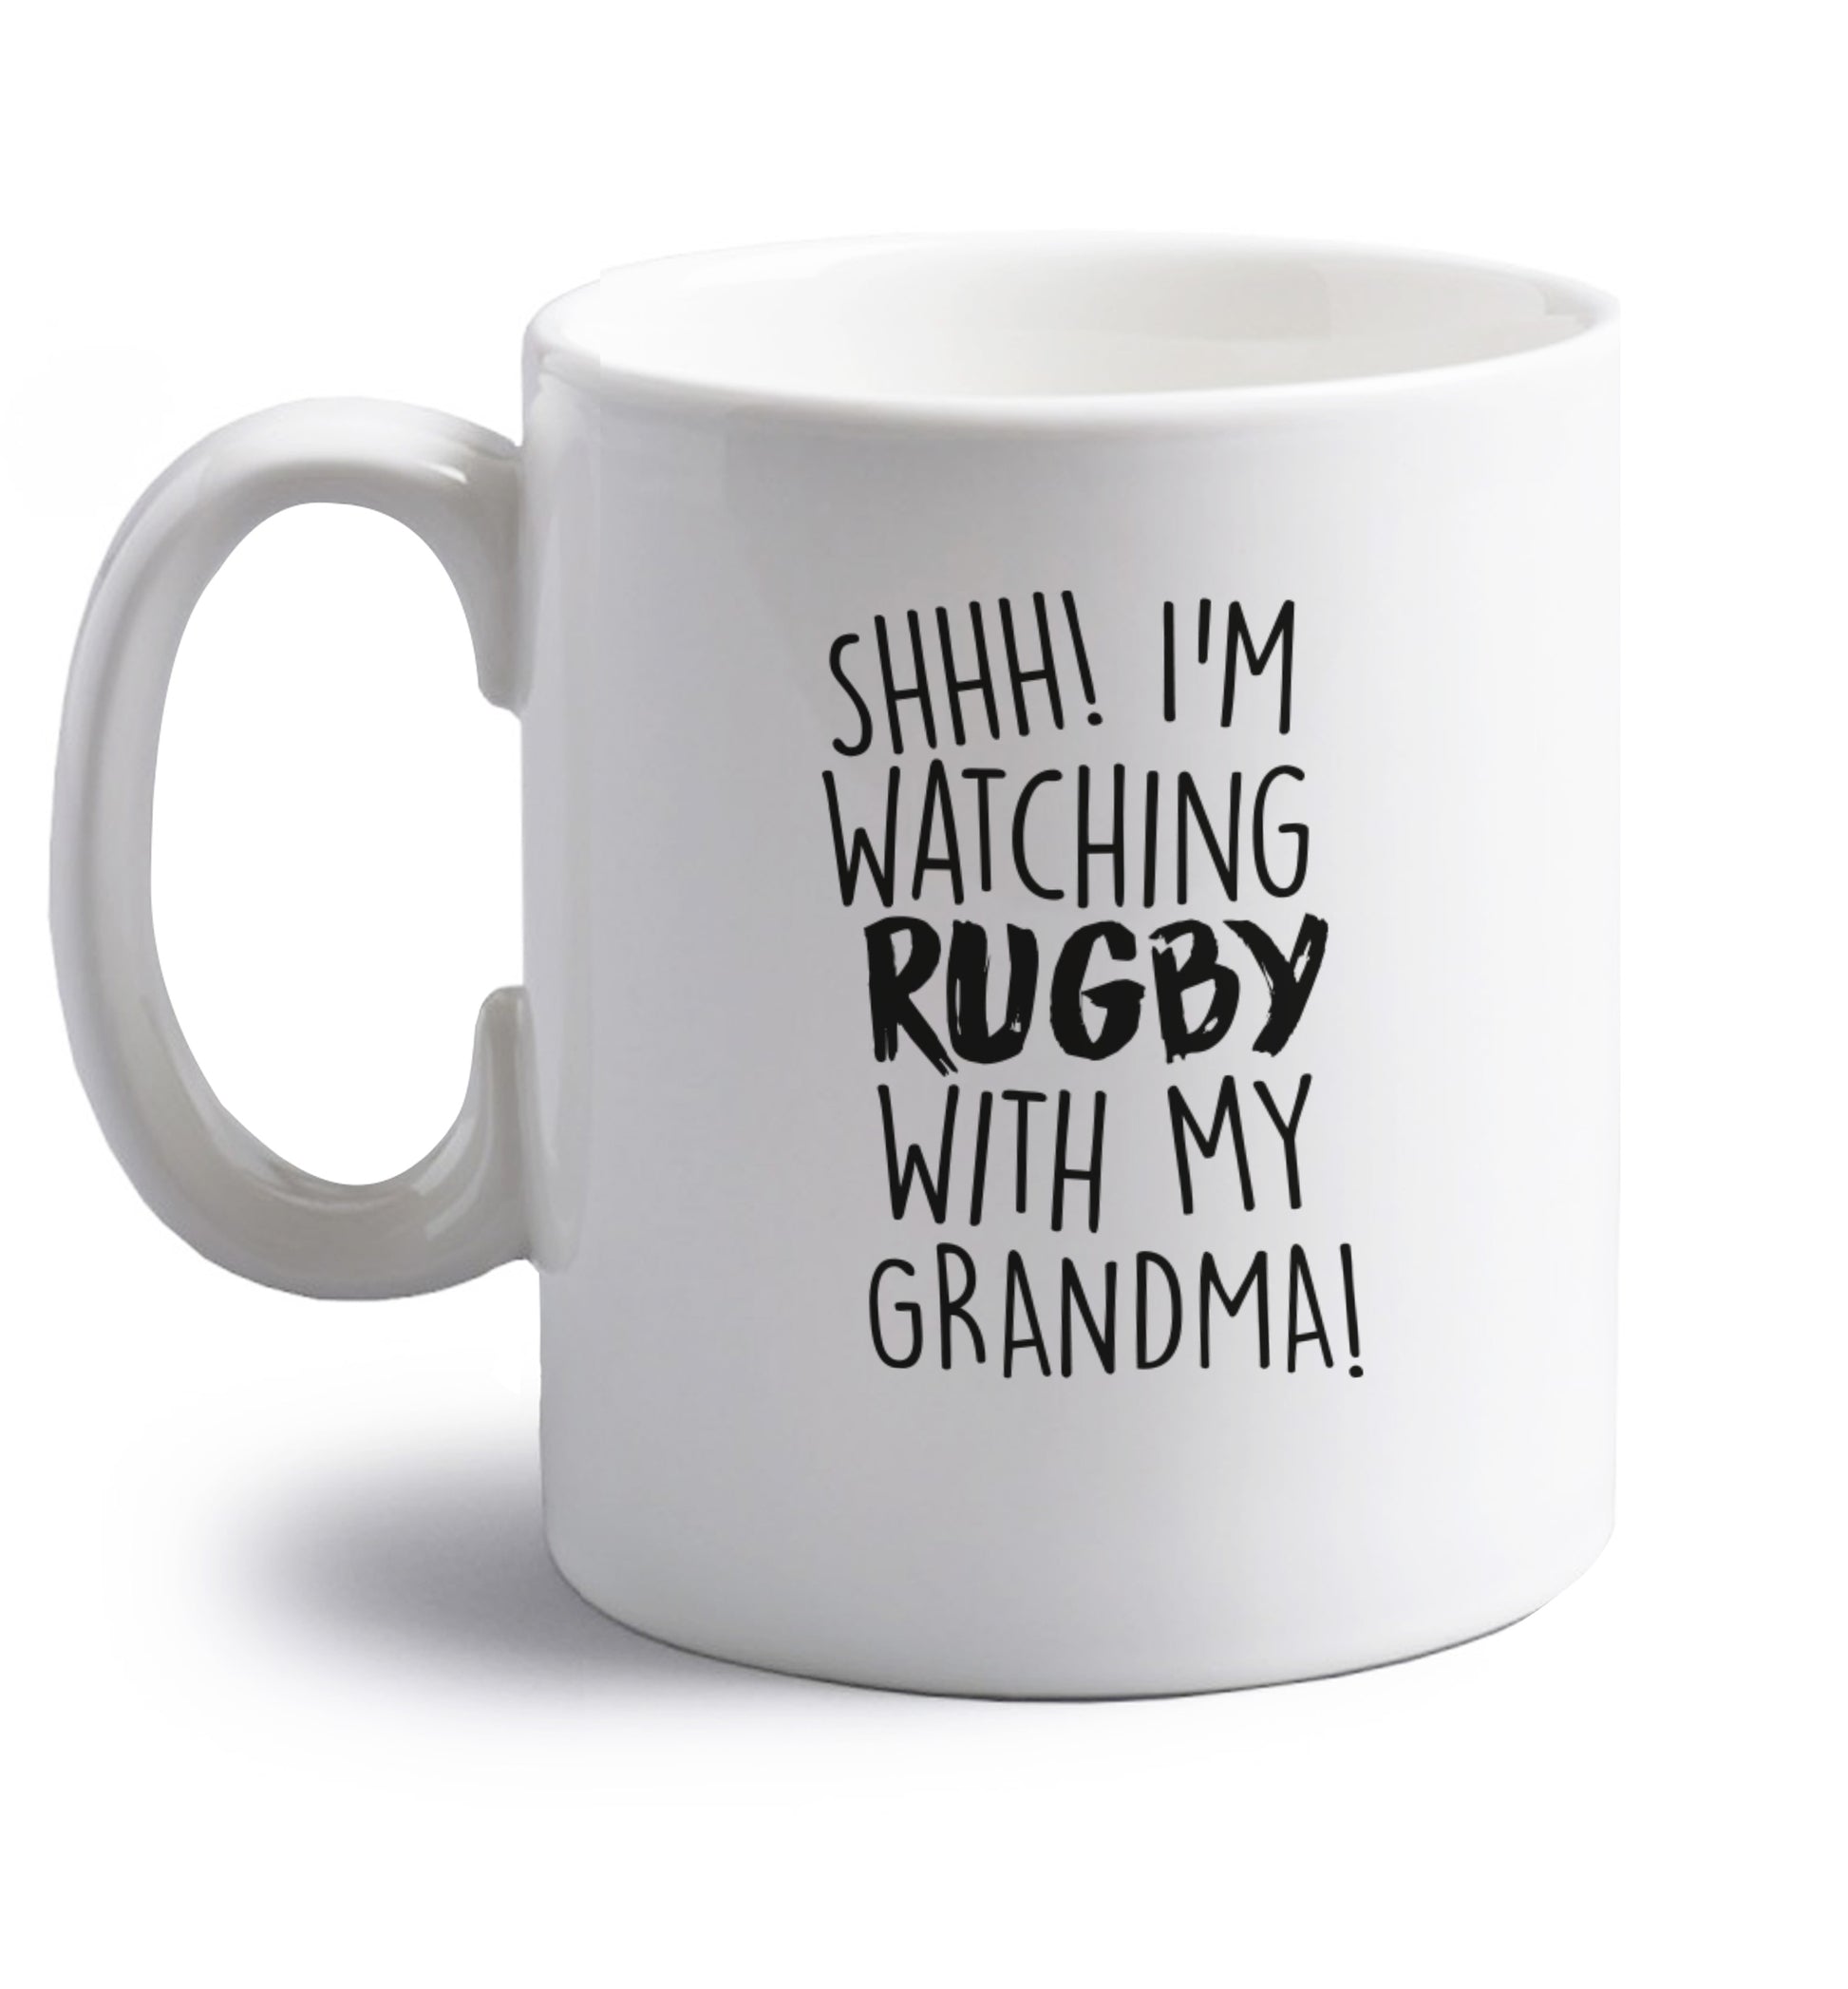 Shh I'm watching rugby with my grandma right handed white ceramic mug 